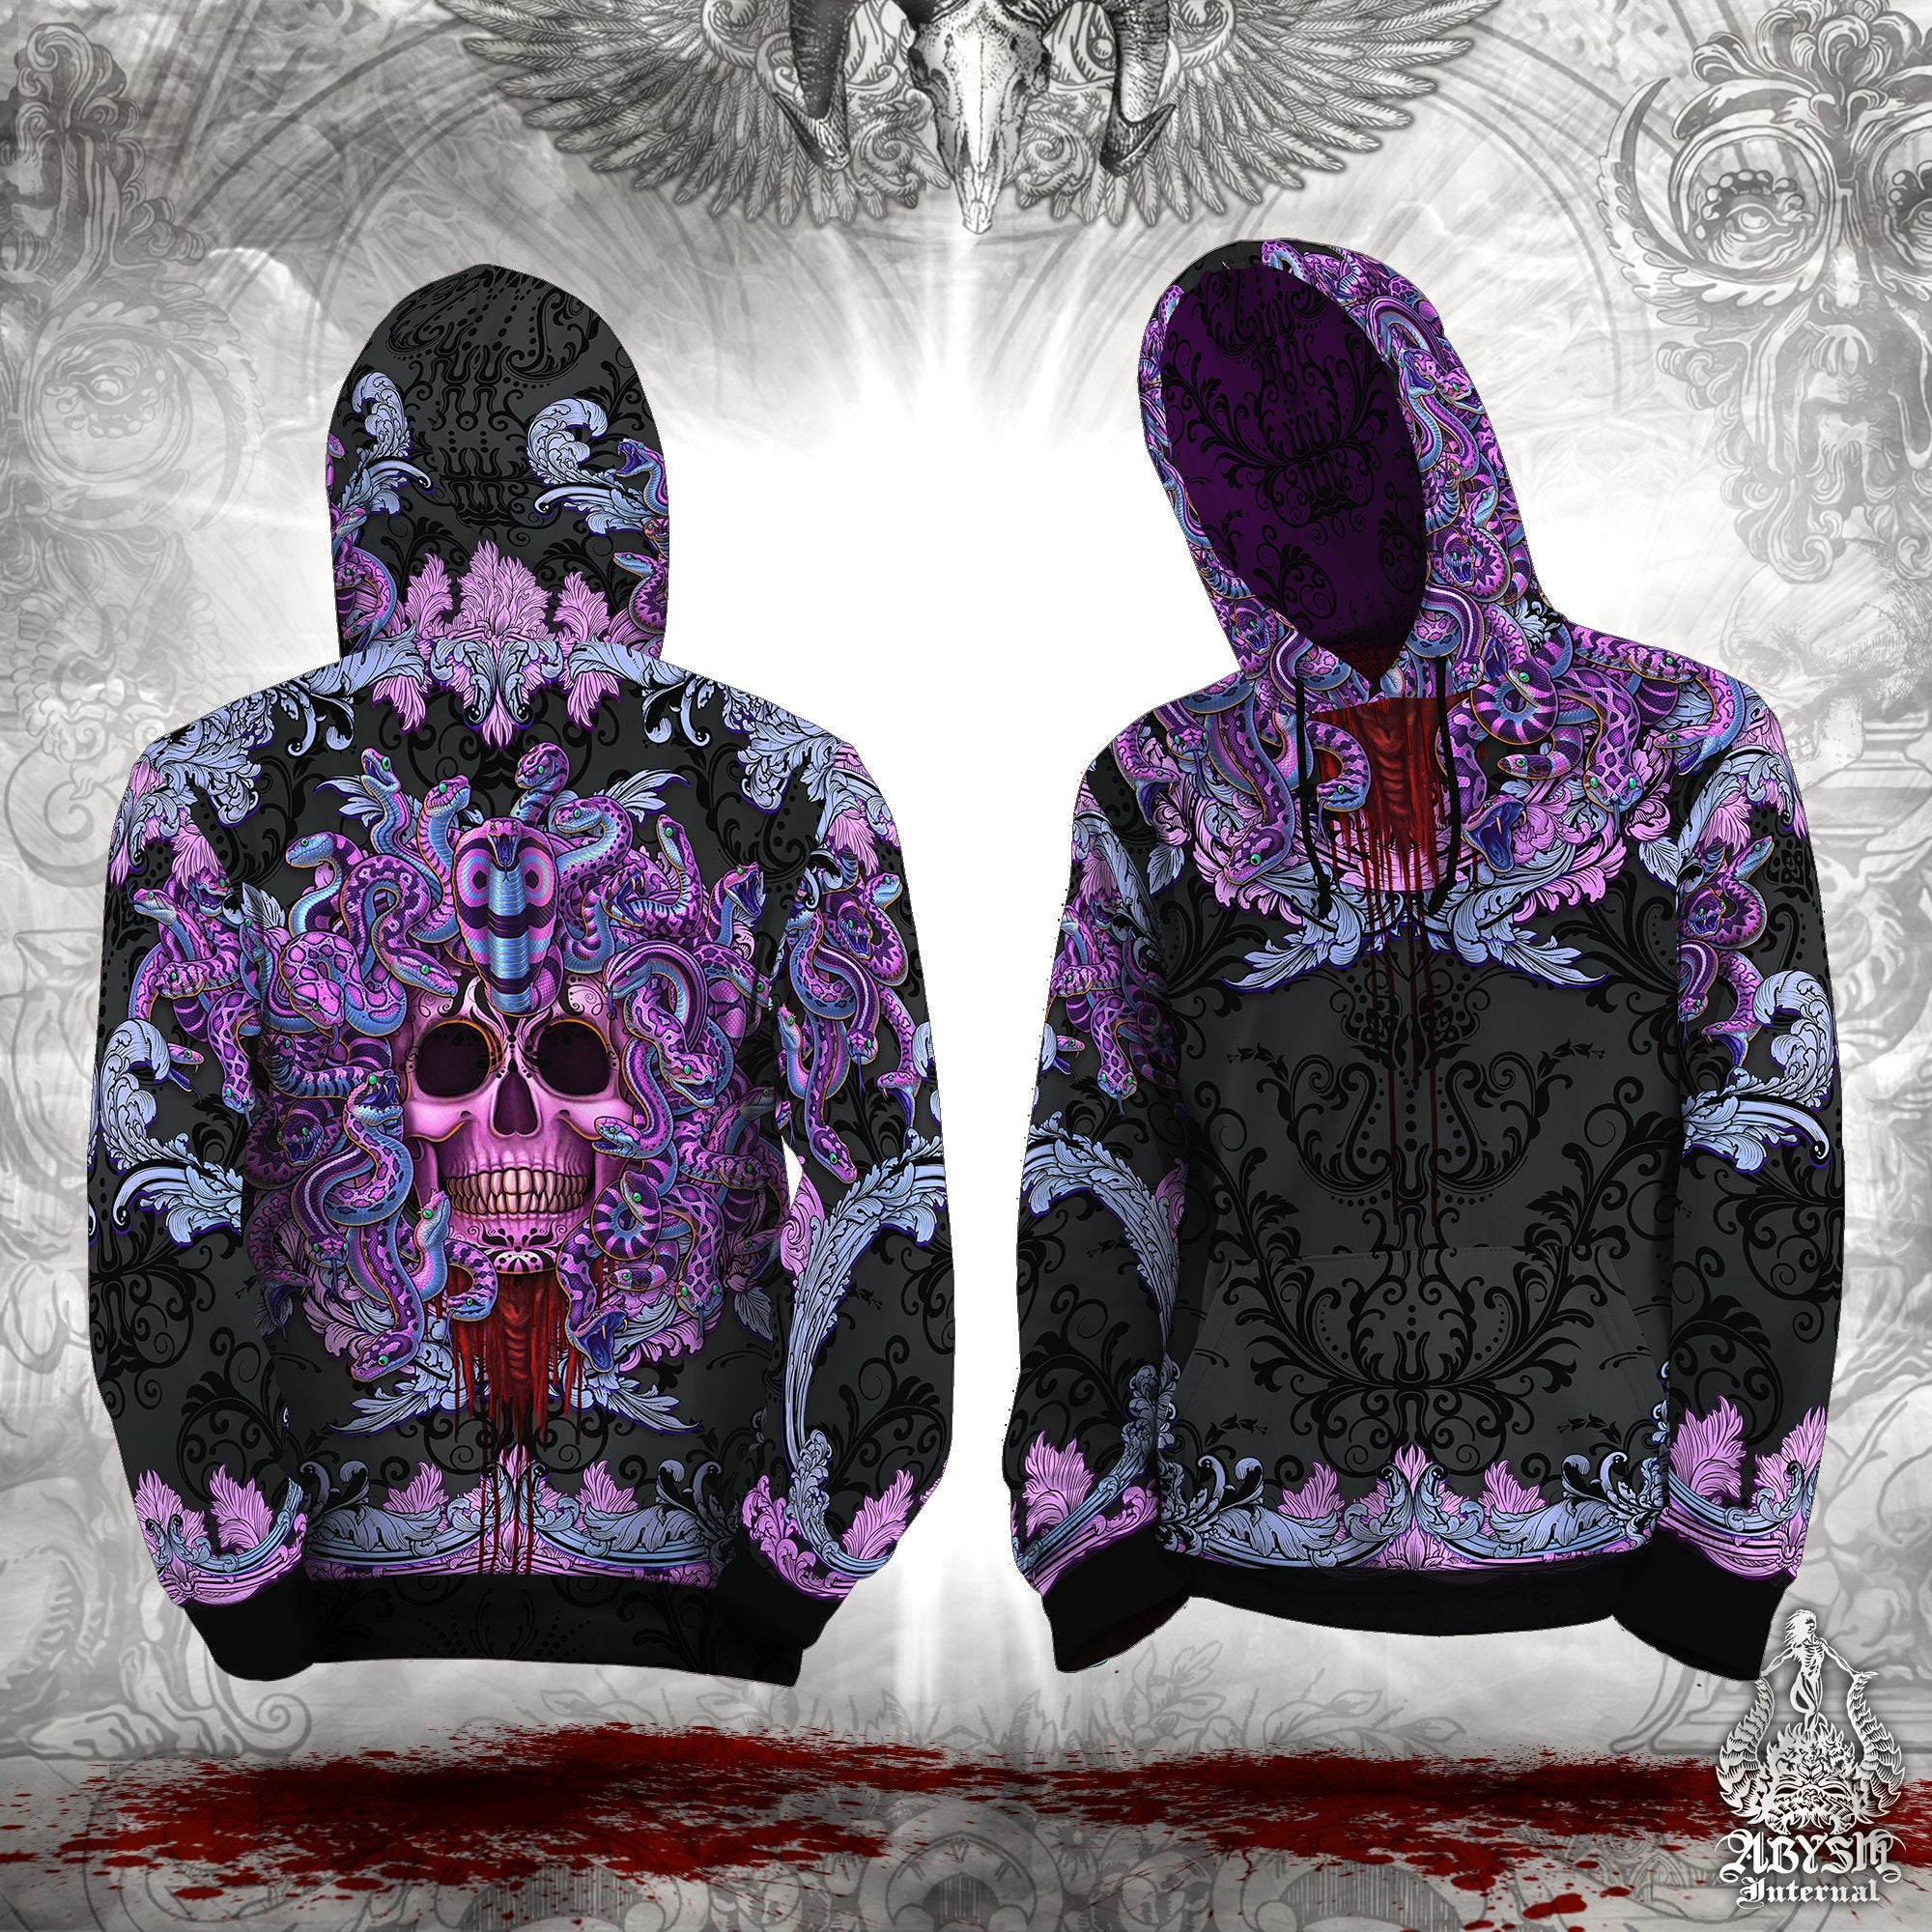 Whimsigoth Hoodie, Rave Streetwear, Skater Sweater, Pastel Goth Pullover, Trippy Outfit, Alternative Clothing, Unisex - Medusa Skull, Black and Purple, 2 Faces - Abysm Internal